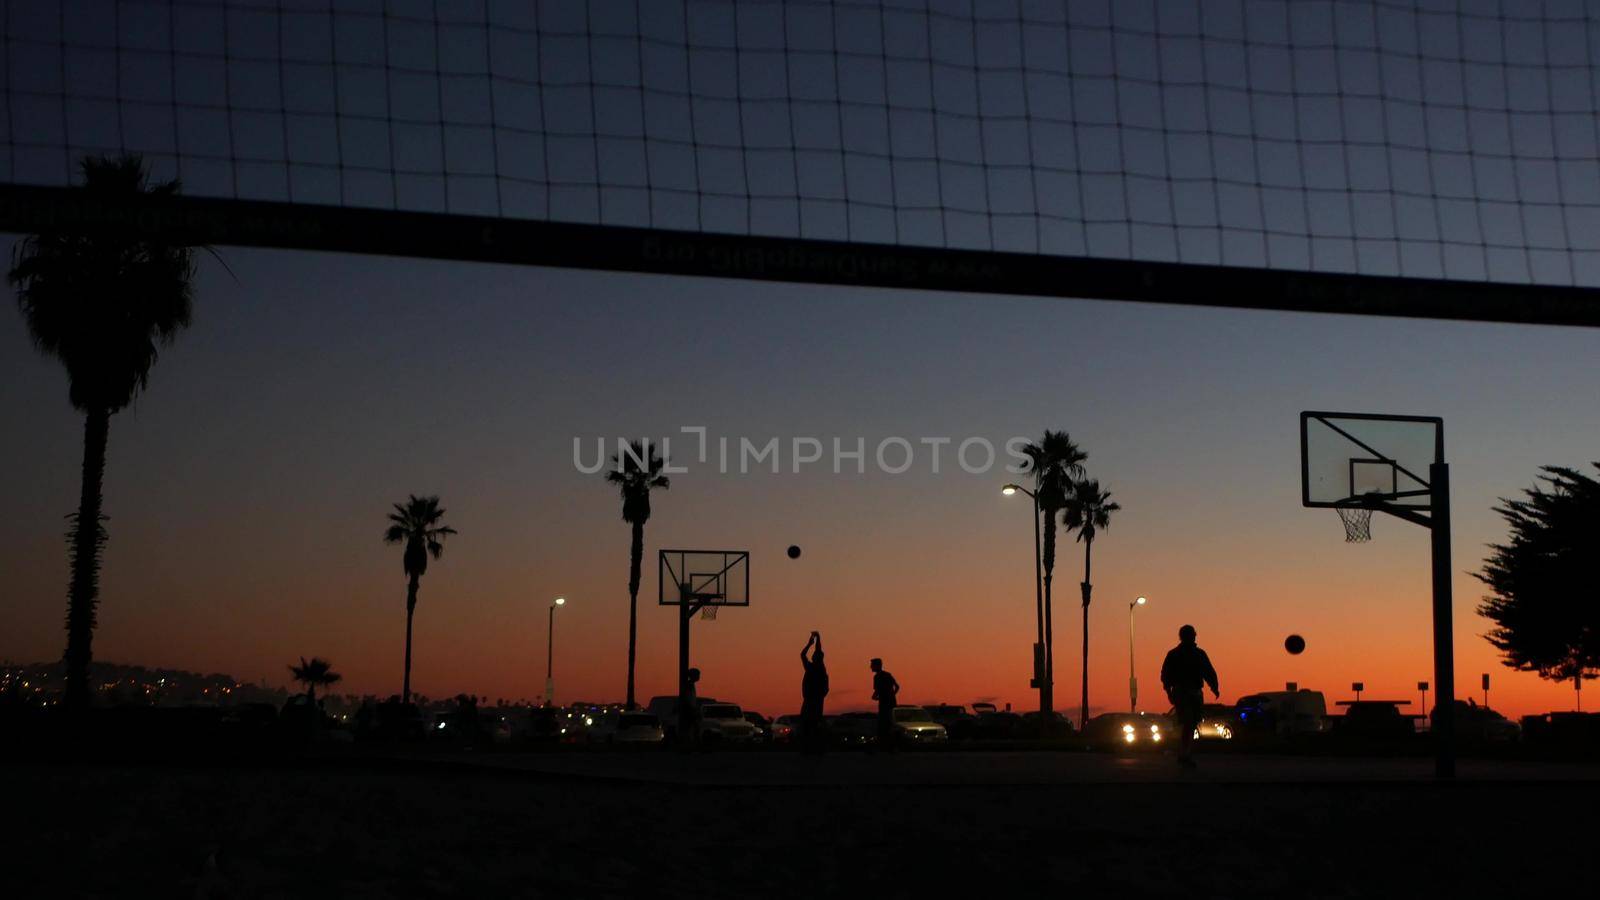 Silhouettes of players on basketball court outdoor, people playing basket ball game, sunset ocean beach, California coast, USA. Black hoop, net and backboard on streetball sport field. Mission beach.